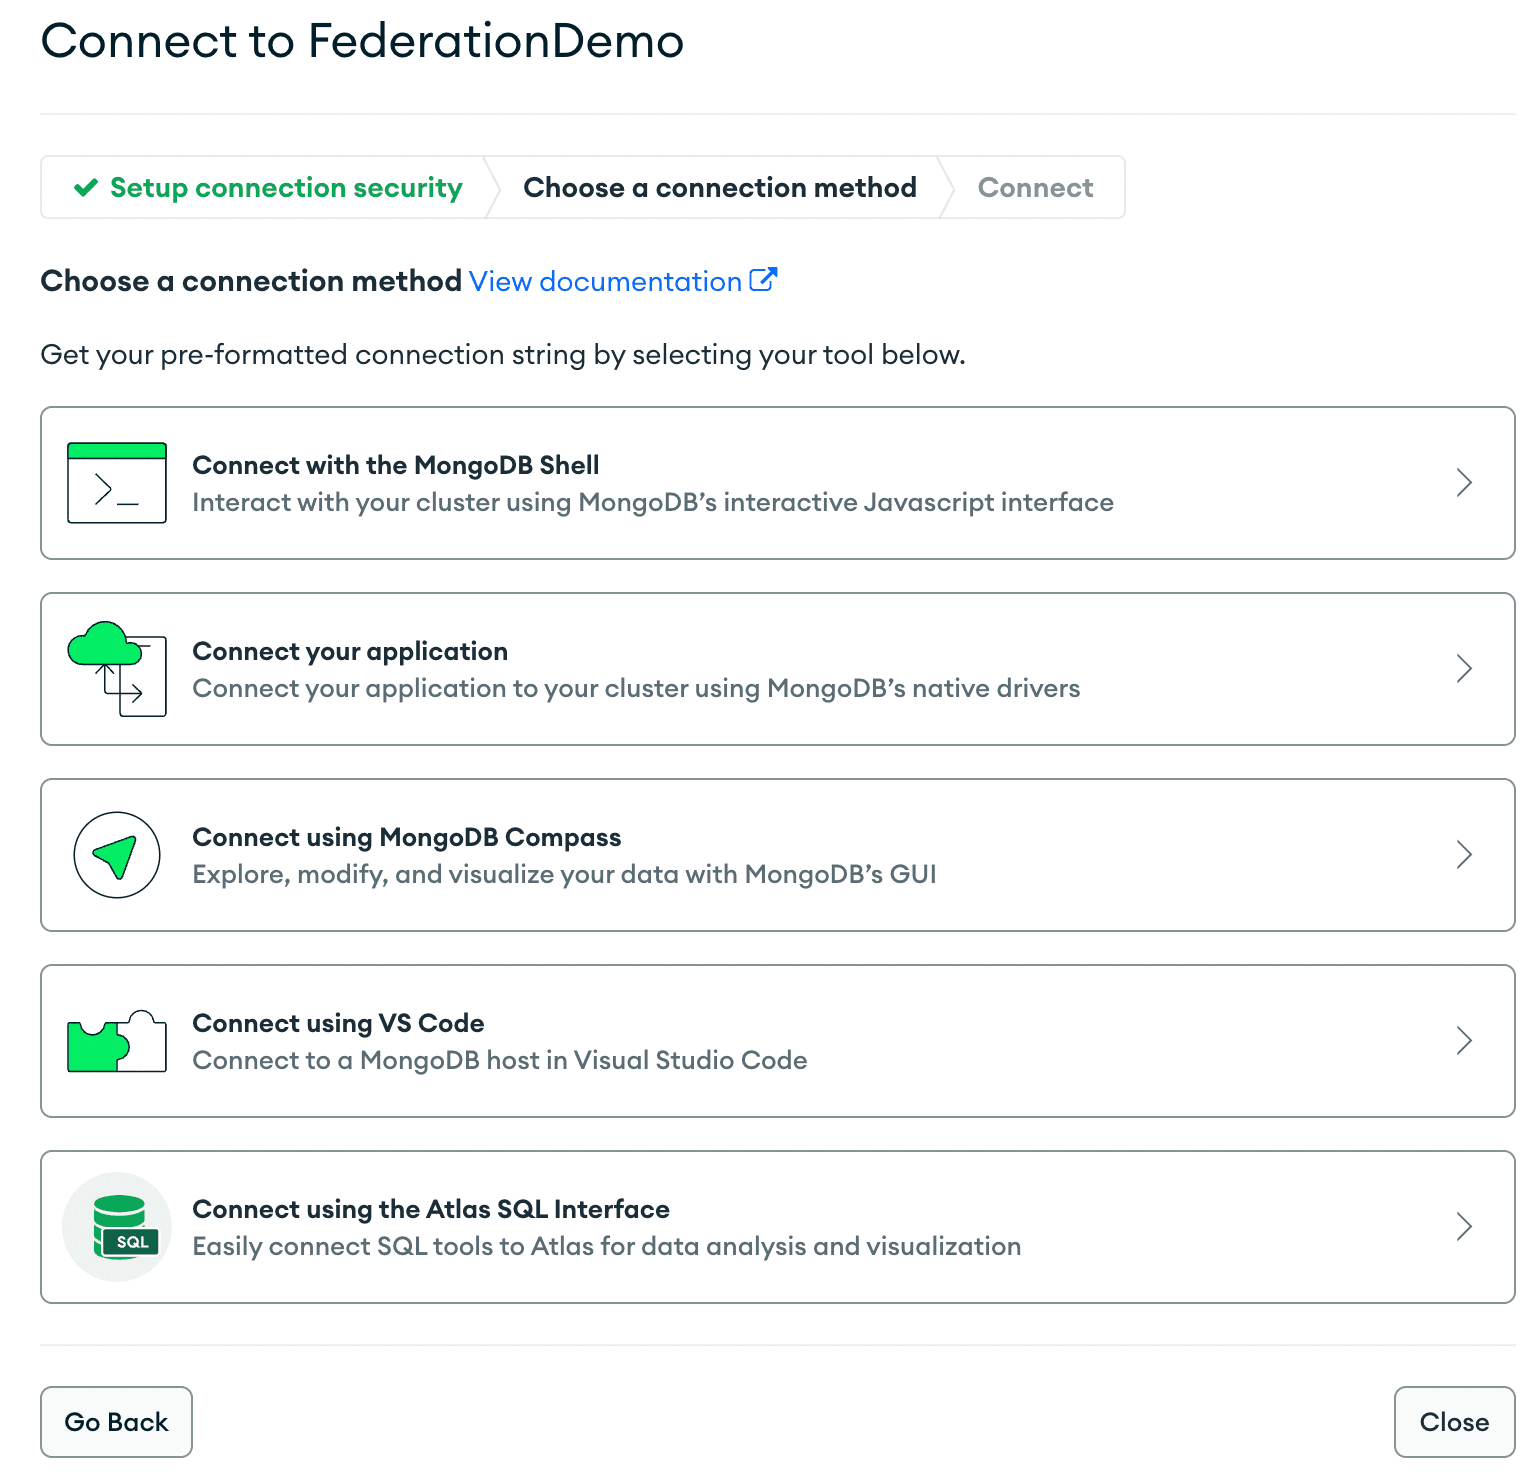 Connect to FederationDemo